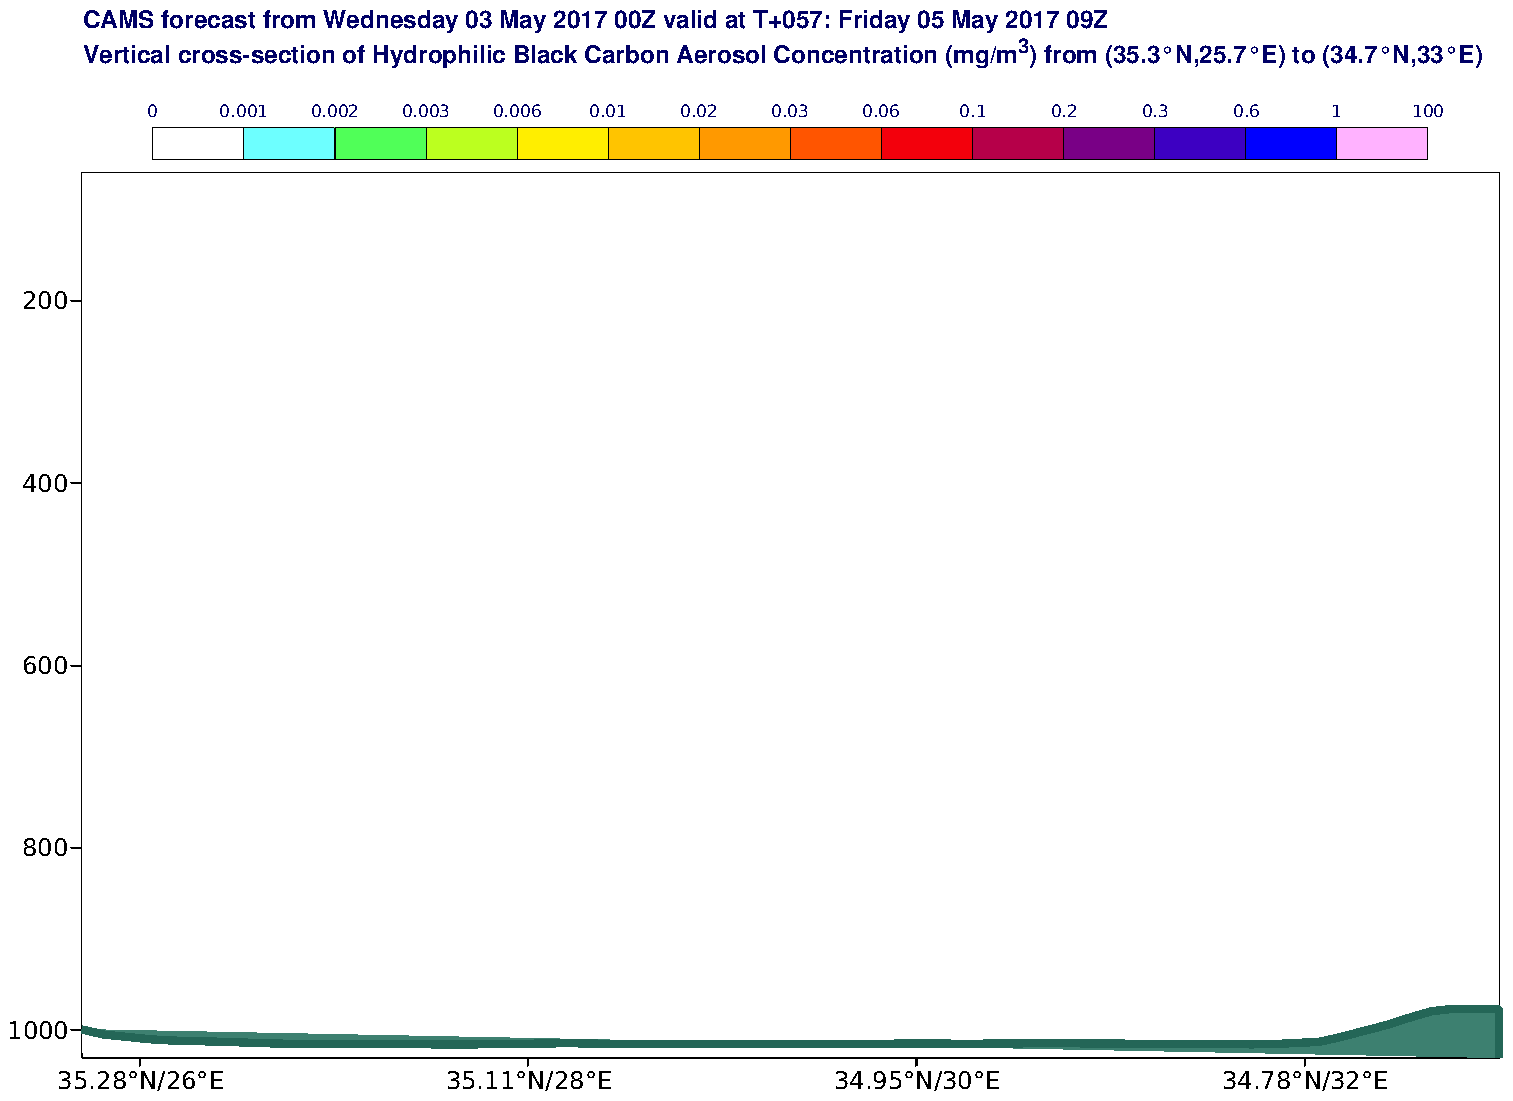 Vertical cross-section of Hydrophilic Black Carbon Aerosol Concentration (mg/m3) valid at T57 - 2017-05-05 09:00